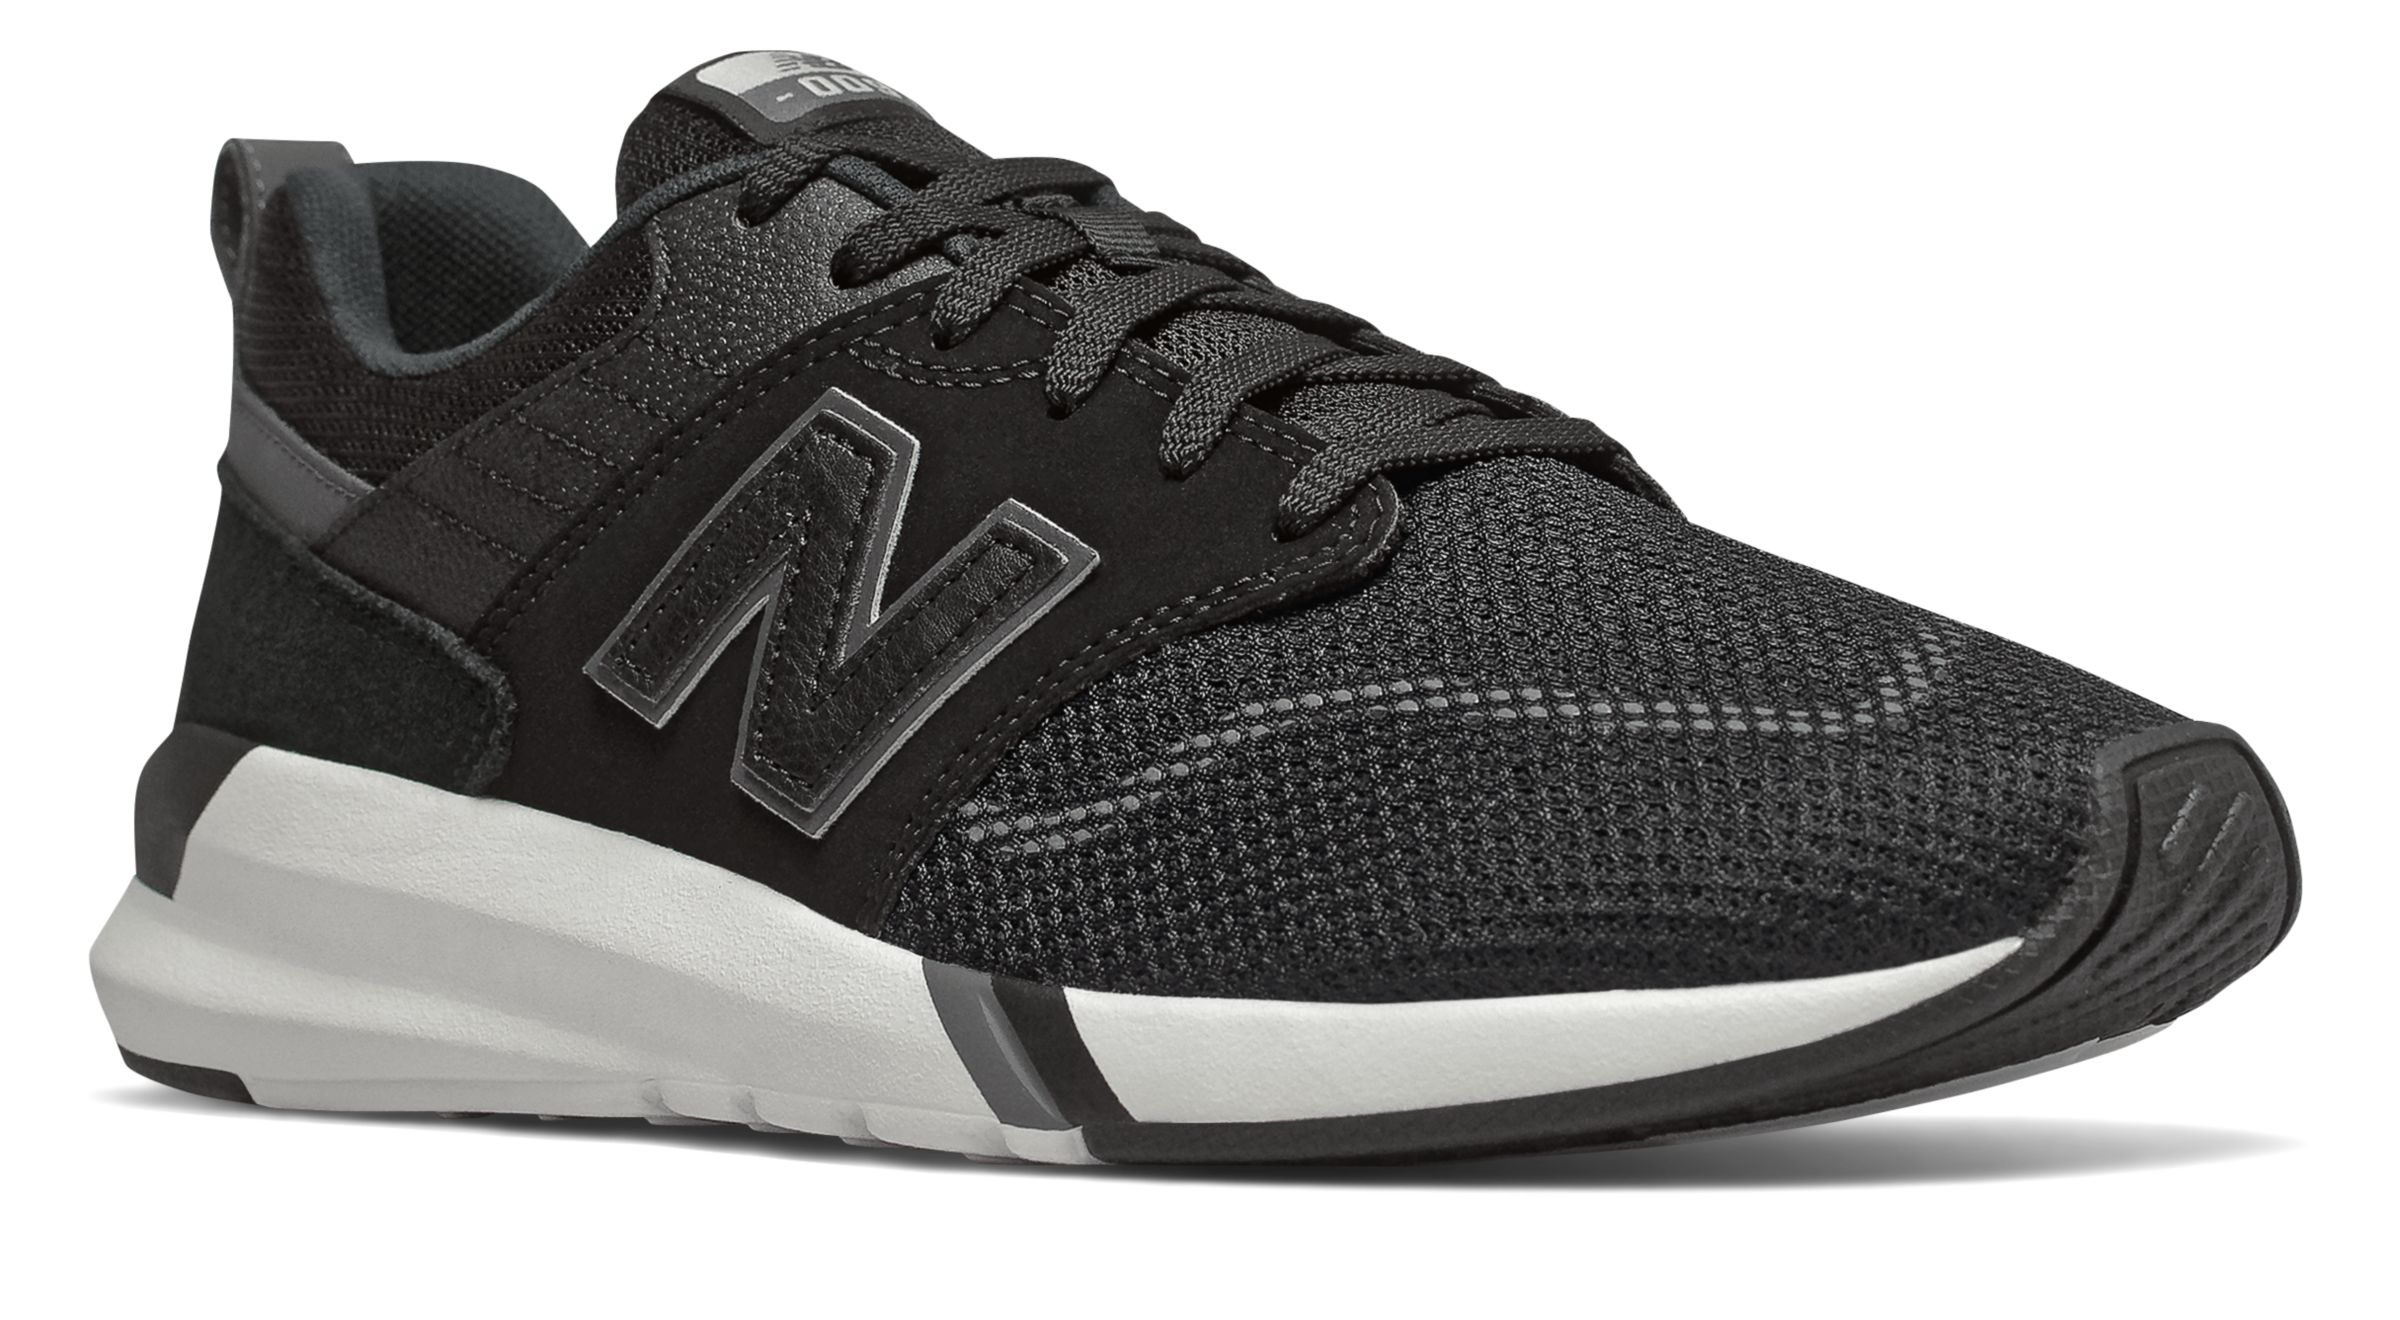 New Balance MS009-ST on Sale - Discounts Up to 50% Off on MS009BK1 at Joe's New  Balance Outlet